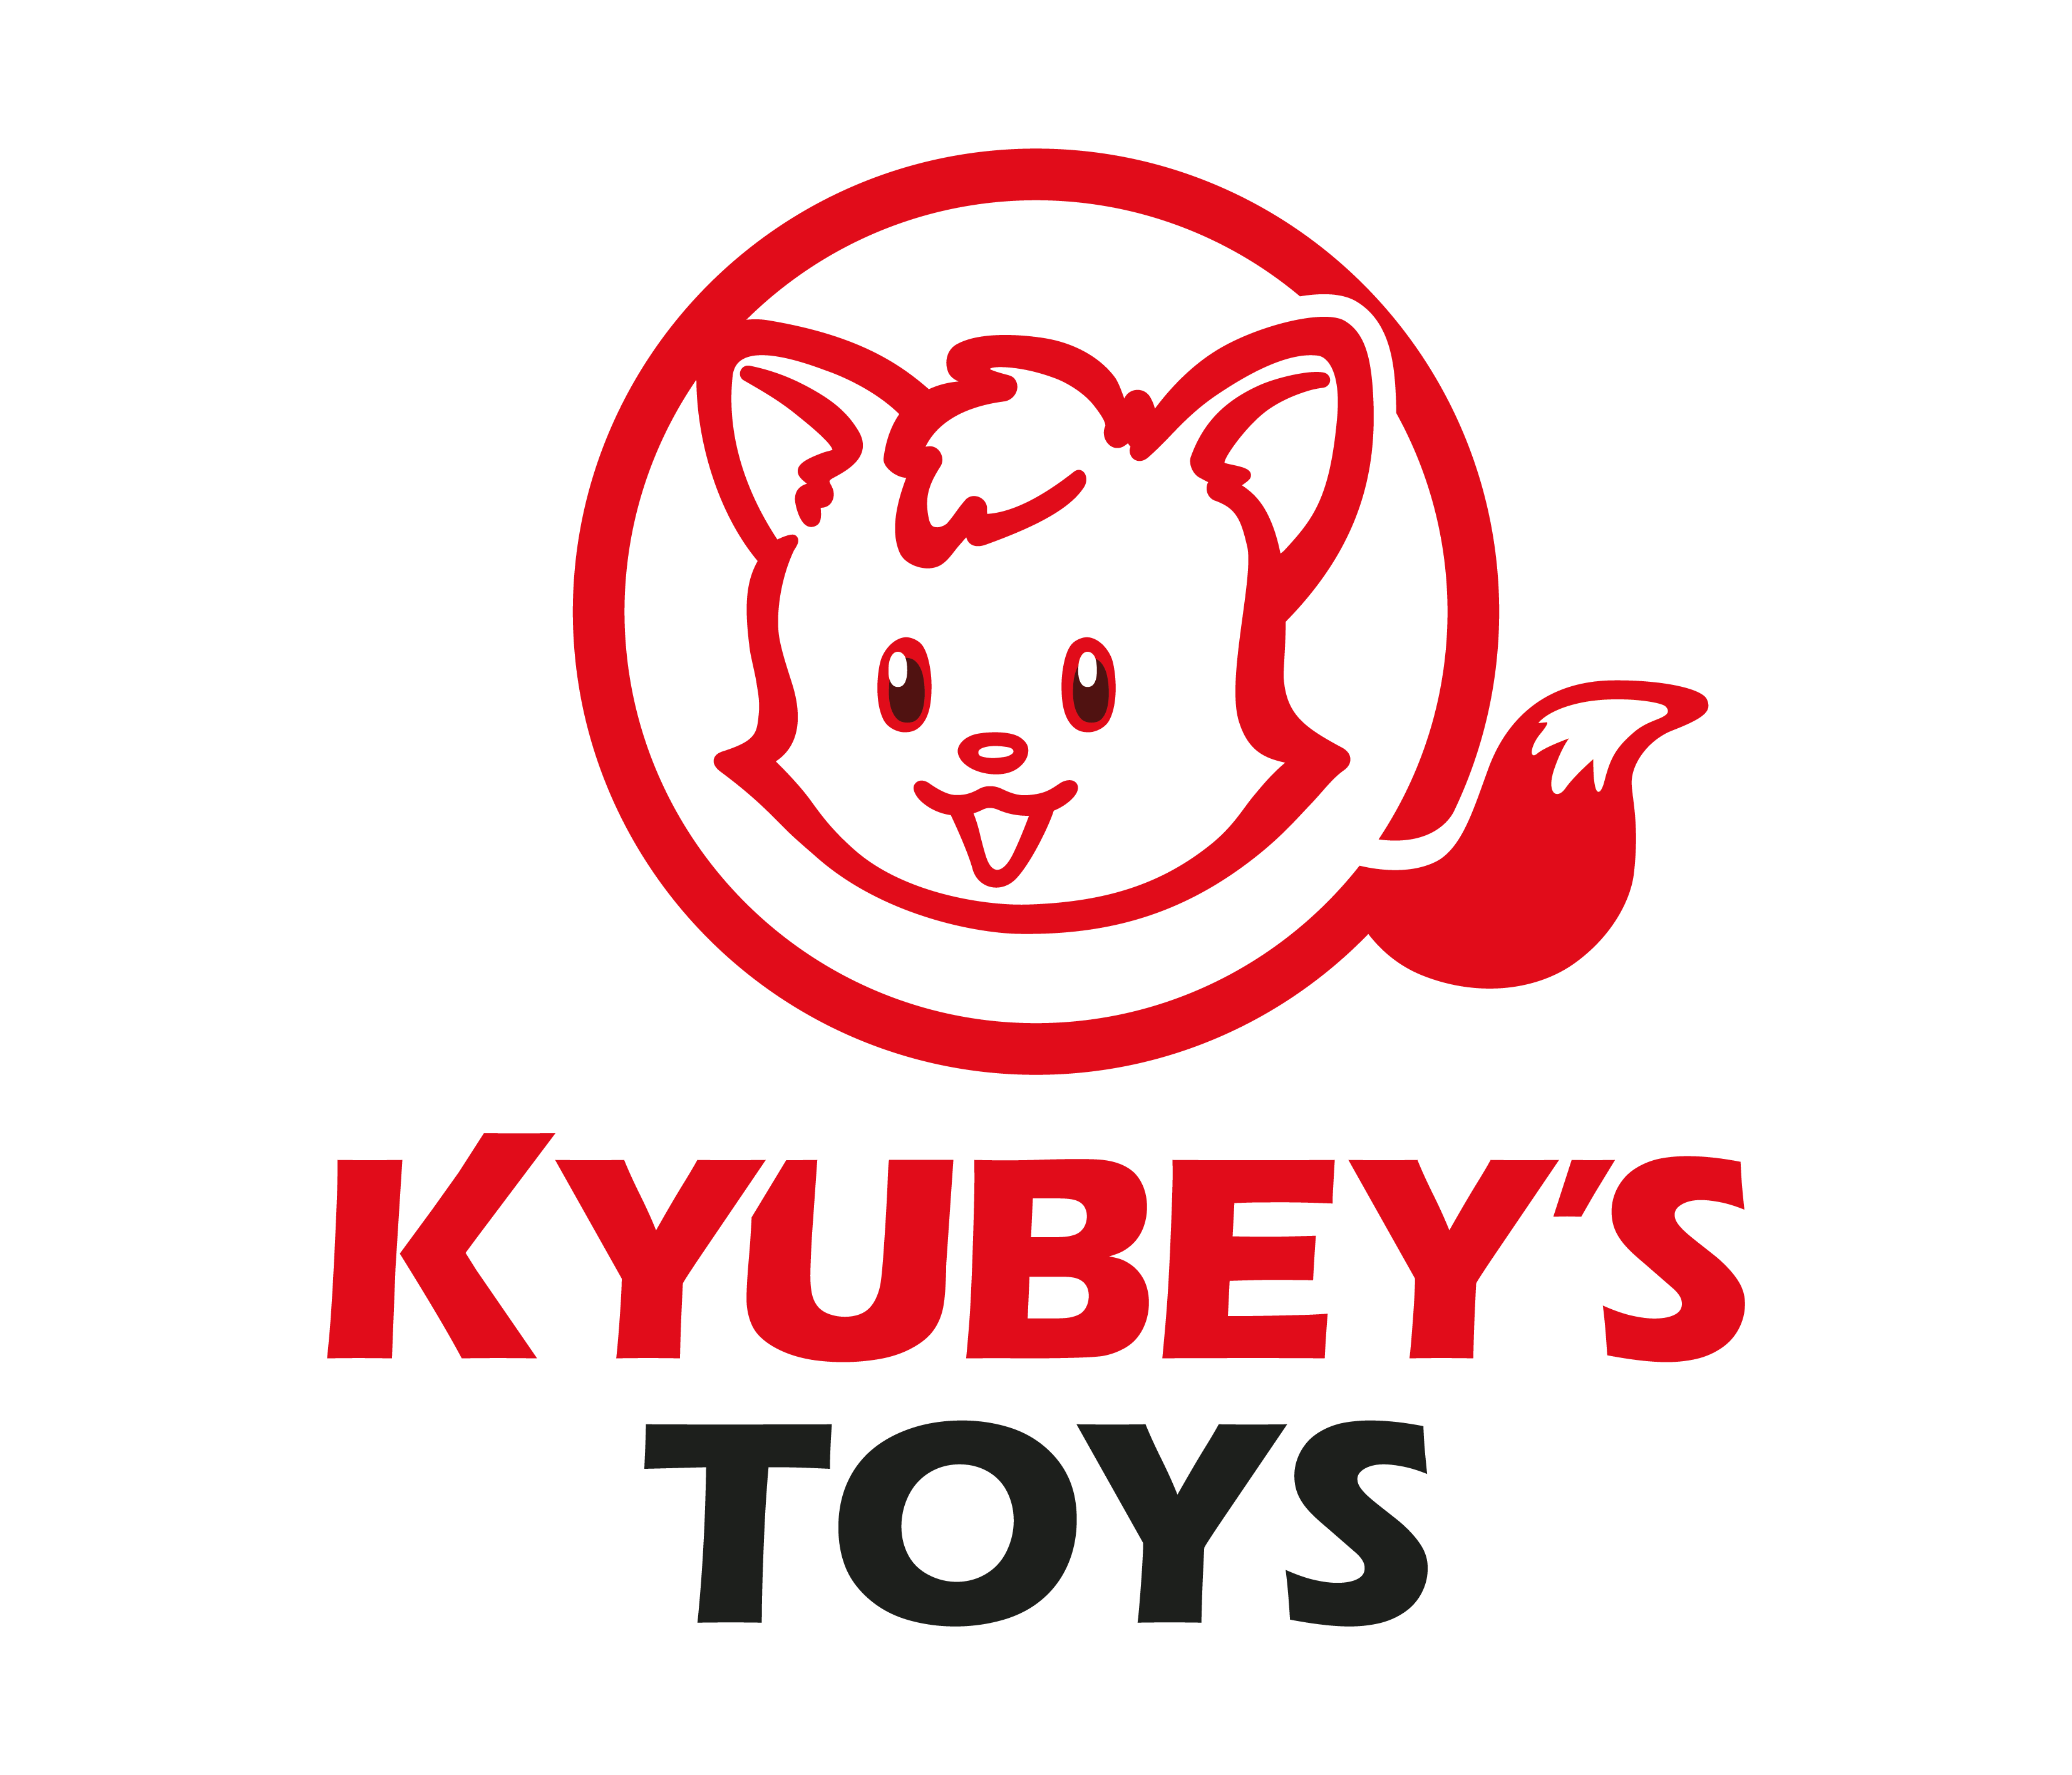 Kyubey’s Toys